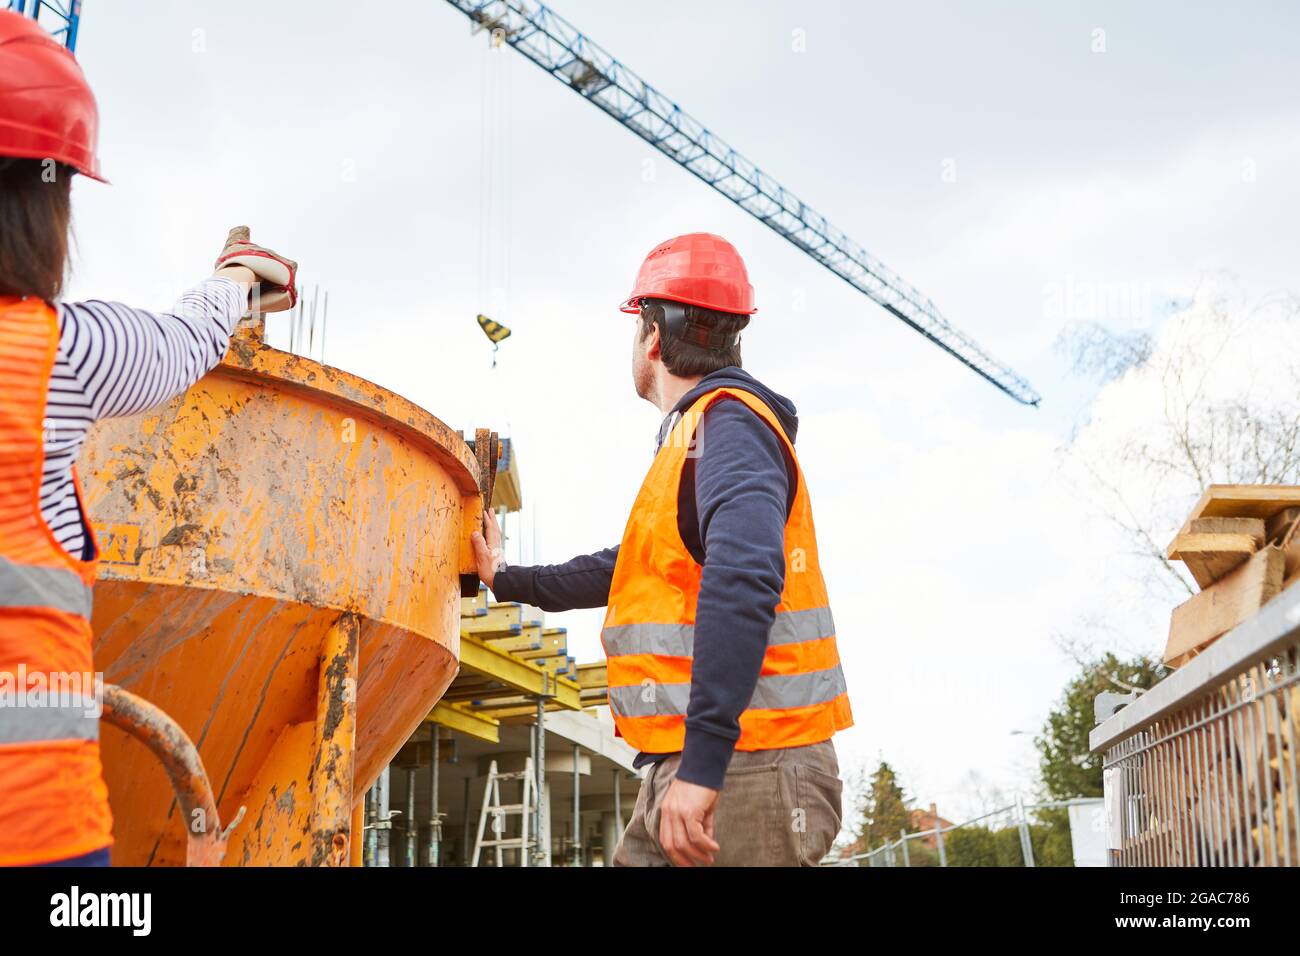 Workers team on the construction site of the new building at the cement mixer with construction crane in the background Stock Photo